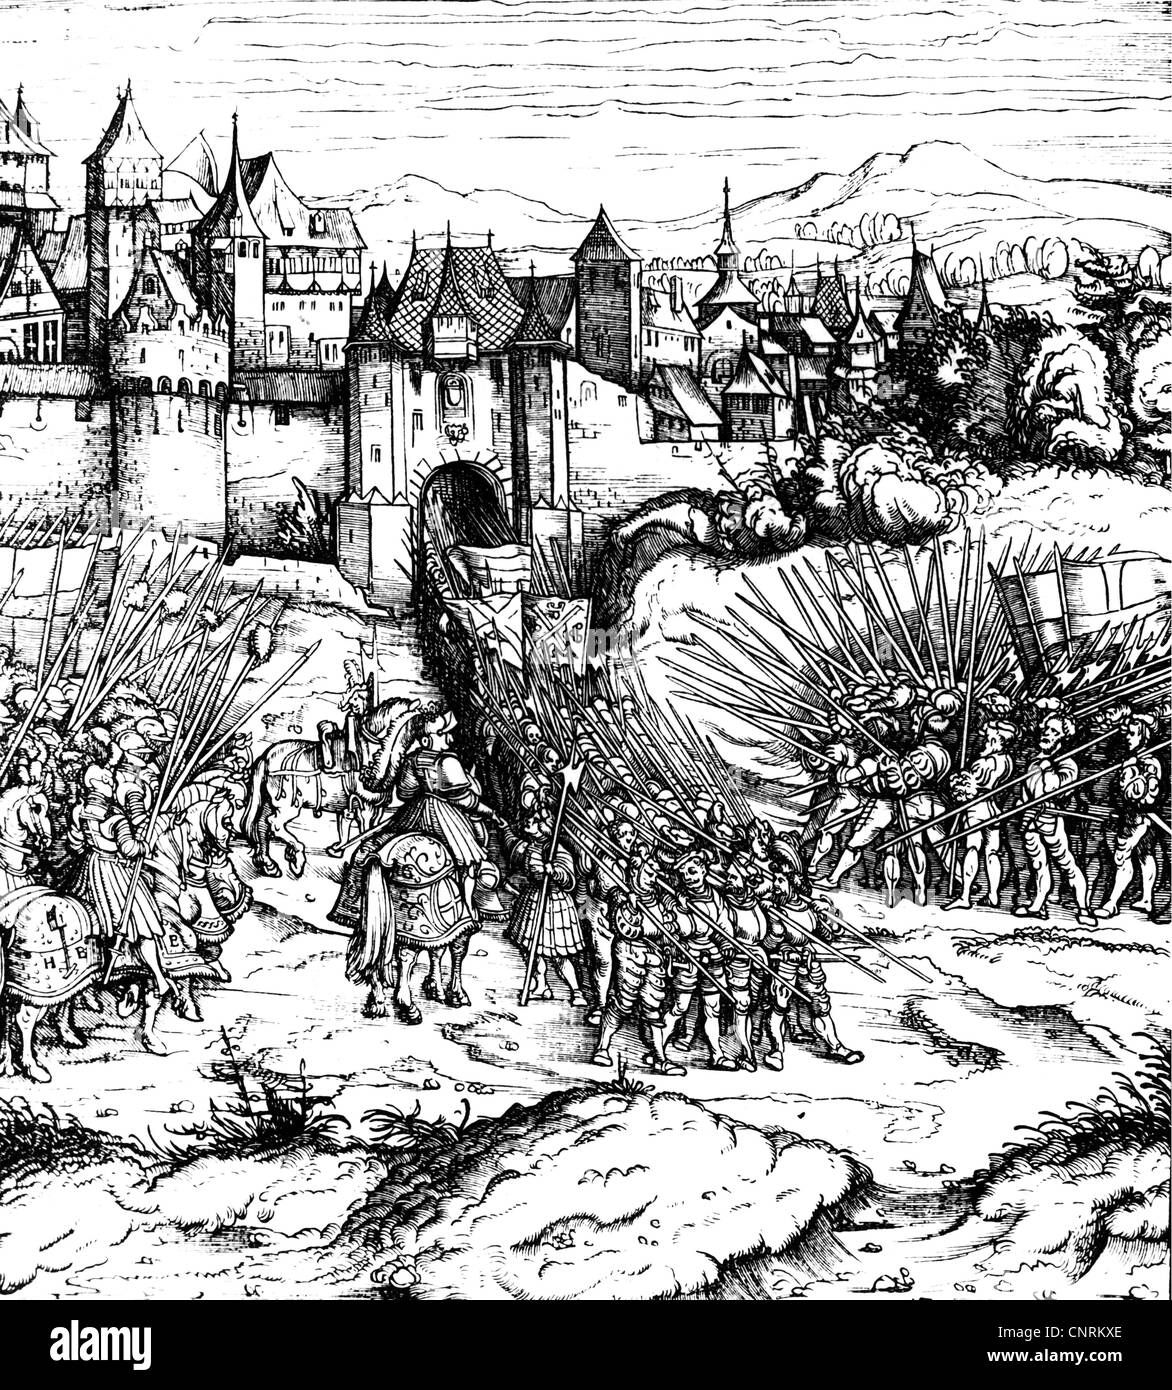 Italian Wars 1494 - 1559, second French campaign, treason of Novarra, Swiss mercenaries extrade Duke Ludovico II 'il Moro' of Milan to the French, 10.4.1500, woodcut by Hans Burgkmair, 'Weisskunig', 1513, Additional-Rights-Clearences-Not Available Stock Photo